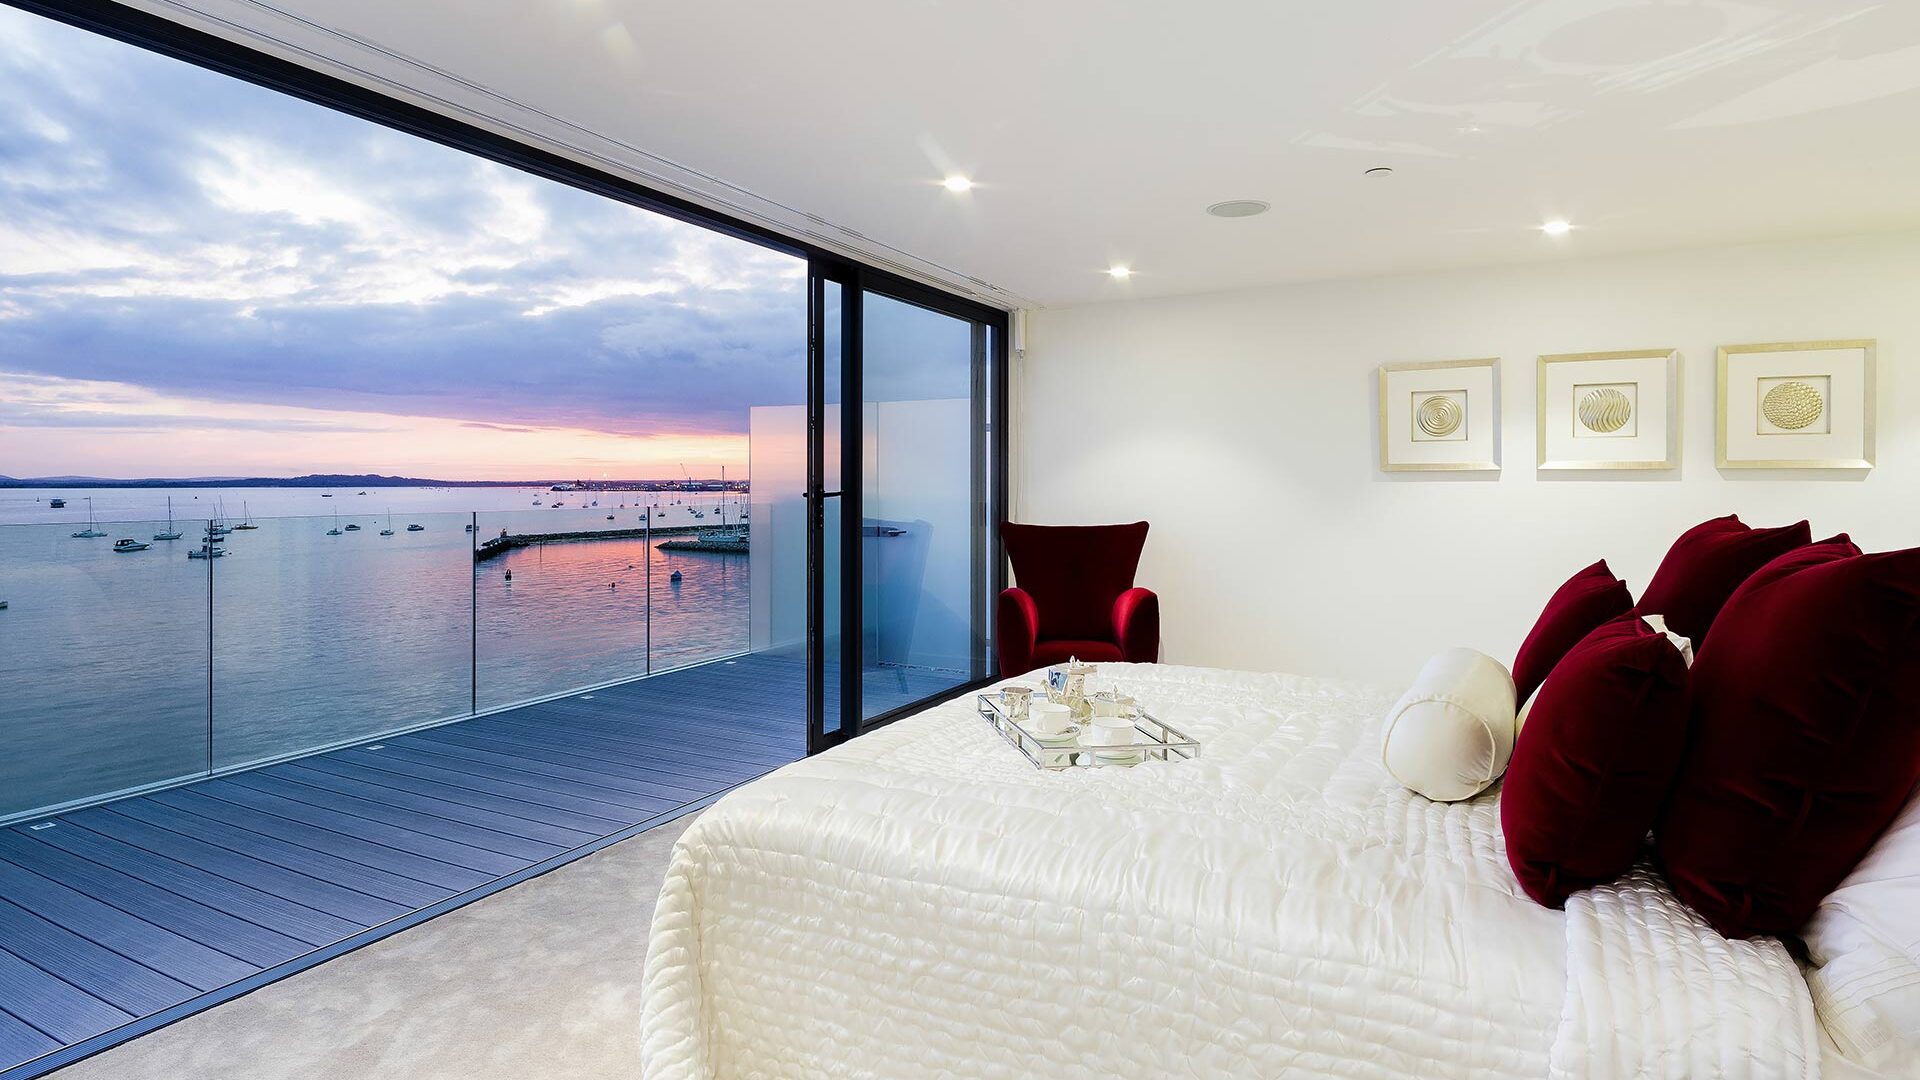 interior bedroom with balcony and beautiful sea views at sunset